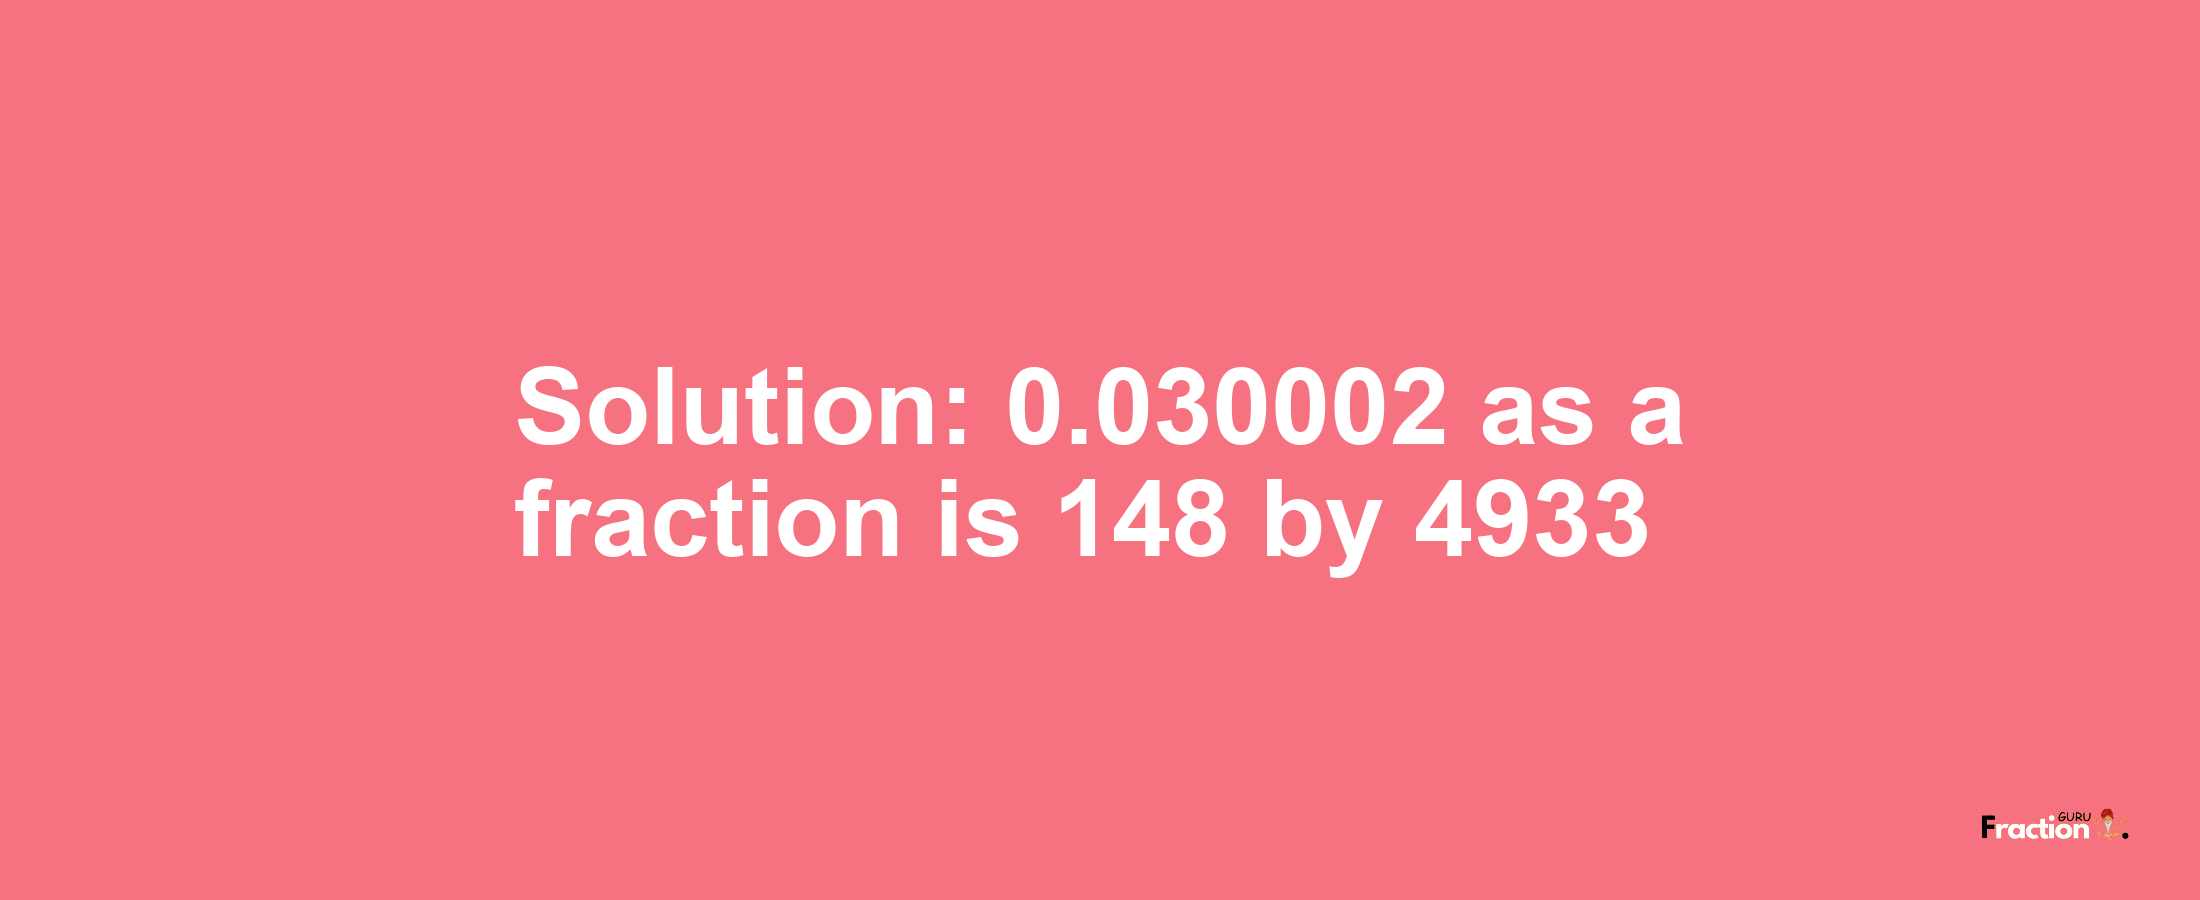 Solution:0.030002 as a fraction is 148/4933